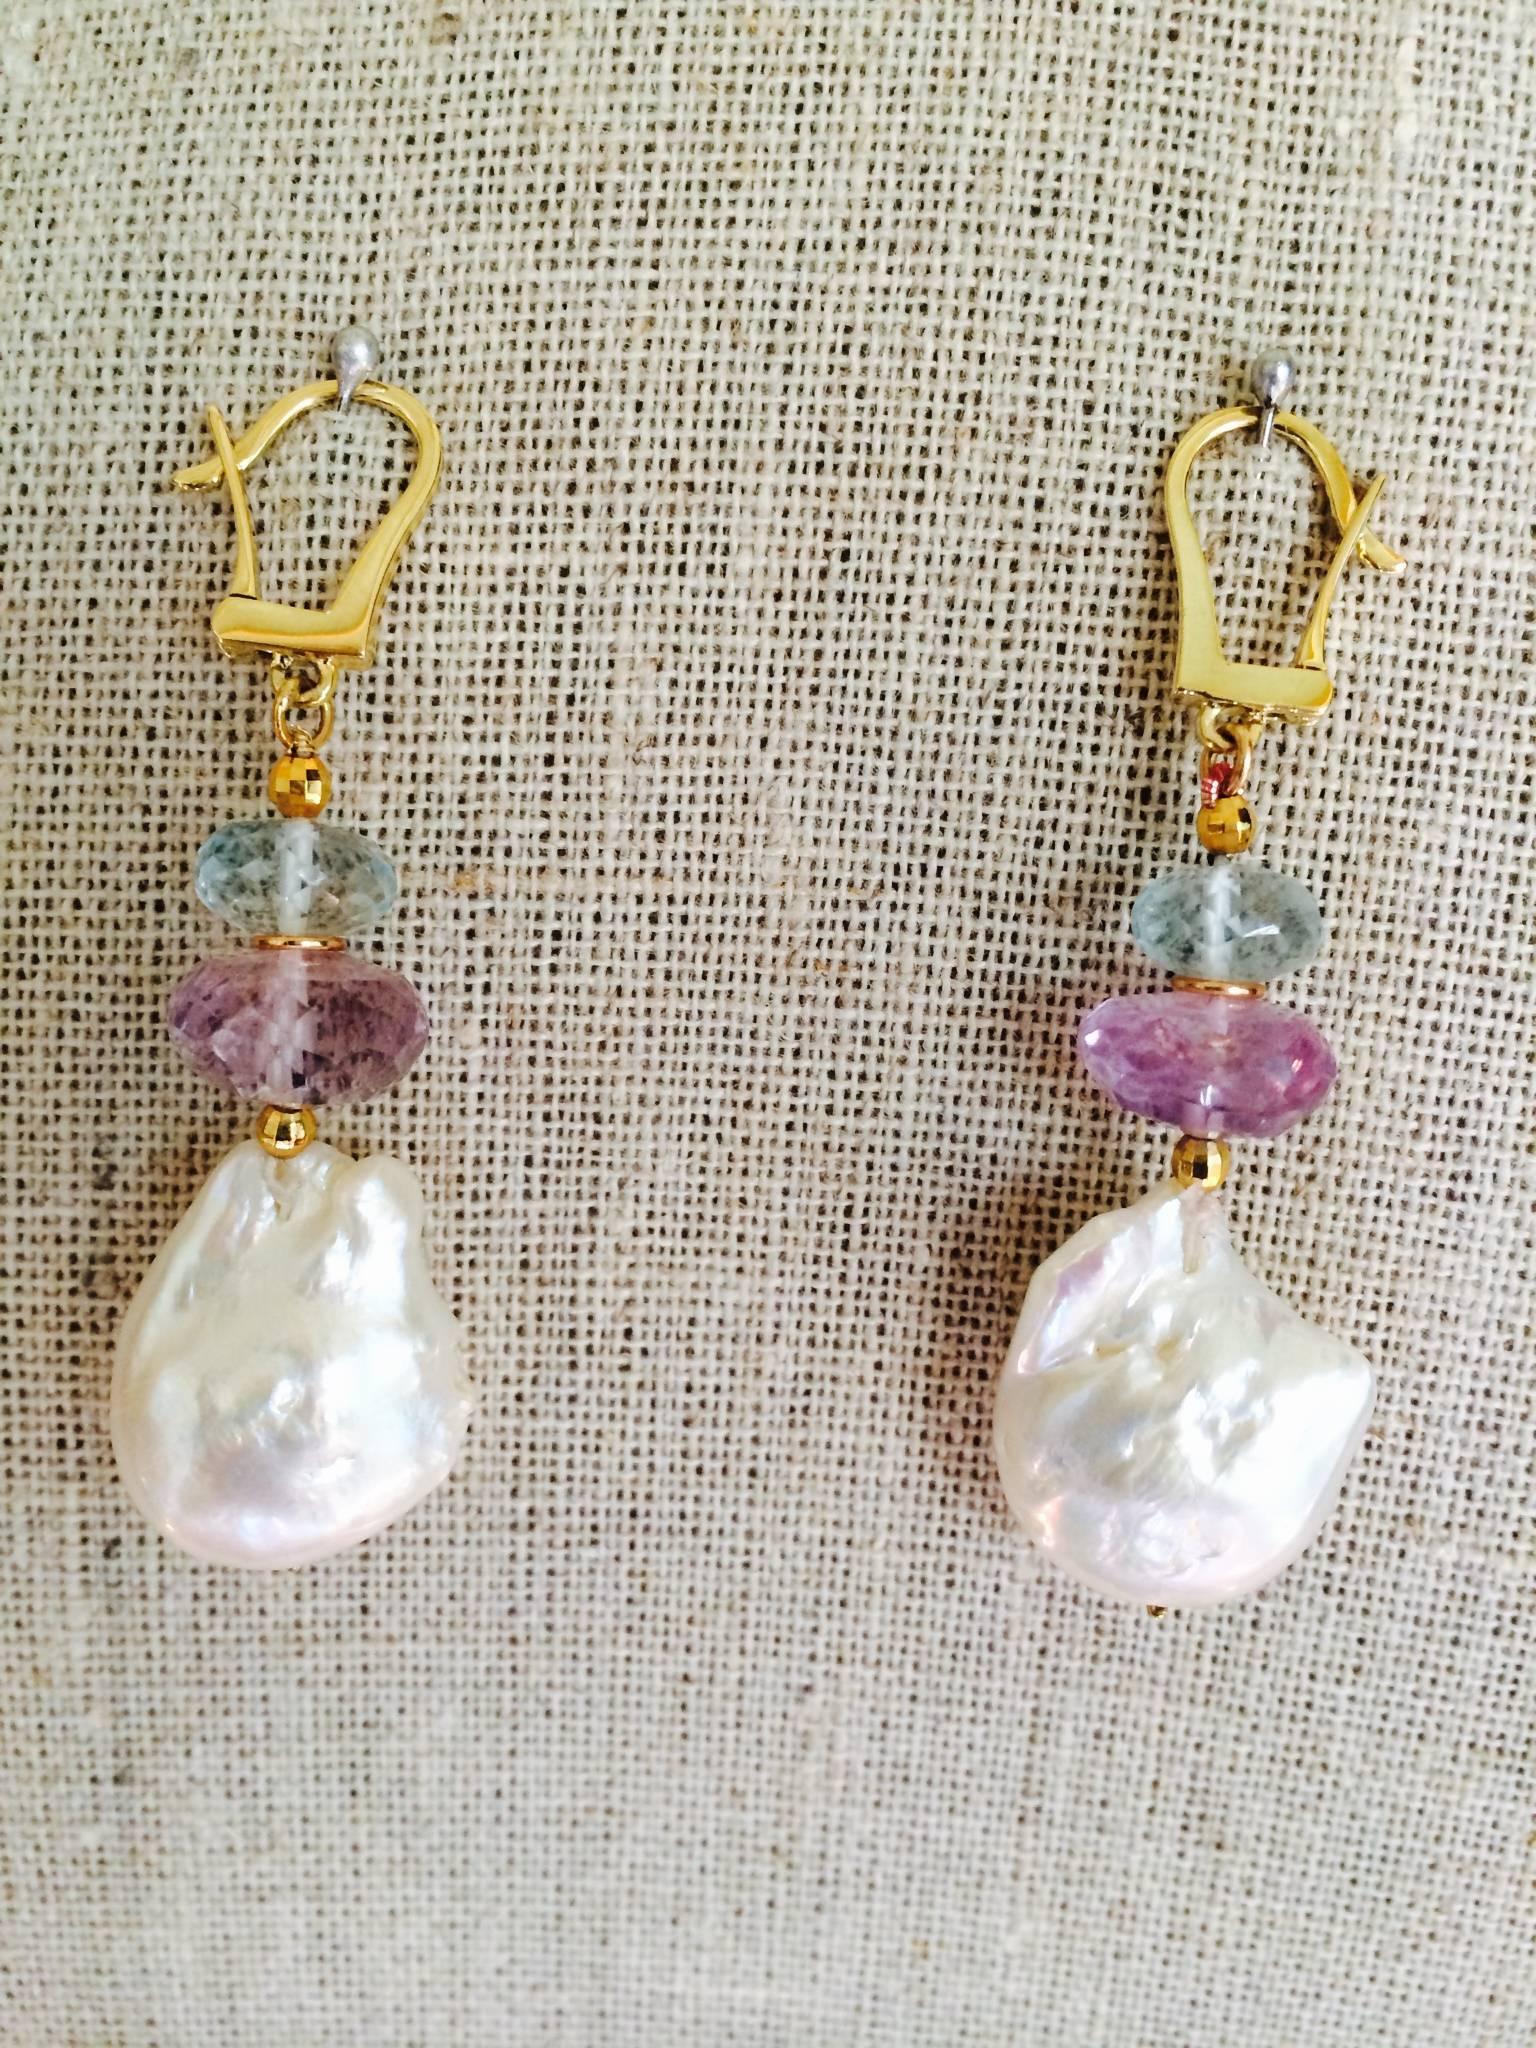 Aquamarine and Amethyst roundels beads are punctuated with 14k gold beads and sit atop a large, eccentric baroque pearl. Secured with a 14k yellow gold hook, the pearl dangles and moves freely with every step. Elegant and playful. Pairs best with